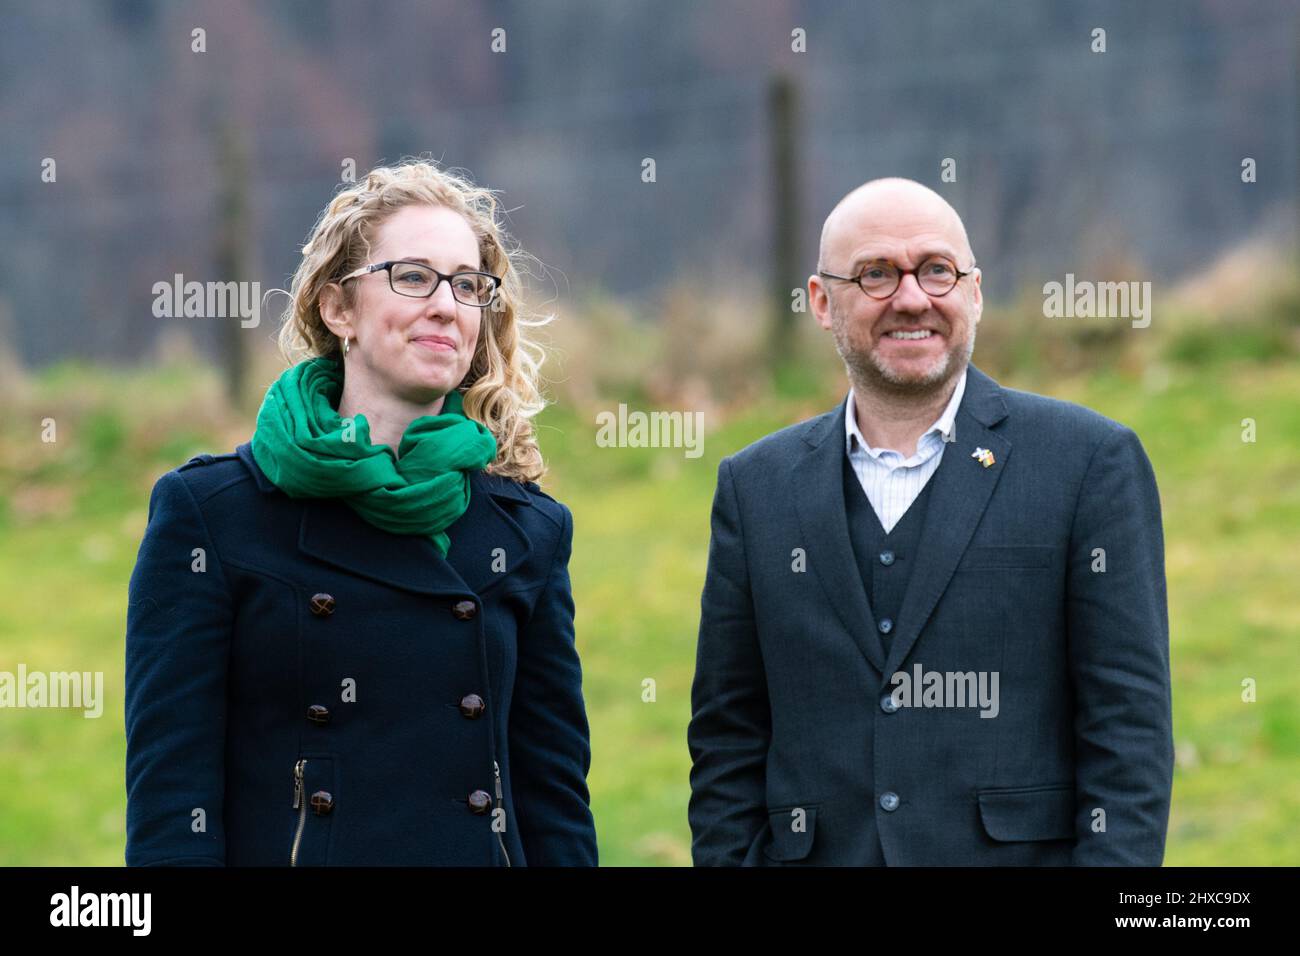 Stirling, Scotland, UK - Scottish Green Party leaders Patrick Harvie and Lorna Slater in the grounds of the Stirling Court Hotel ahead of the Scottish Green Party conference which is held there tomorrow Credit: Kay Roxby/Alamy Live News Stock Photo